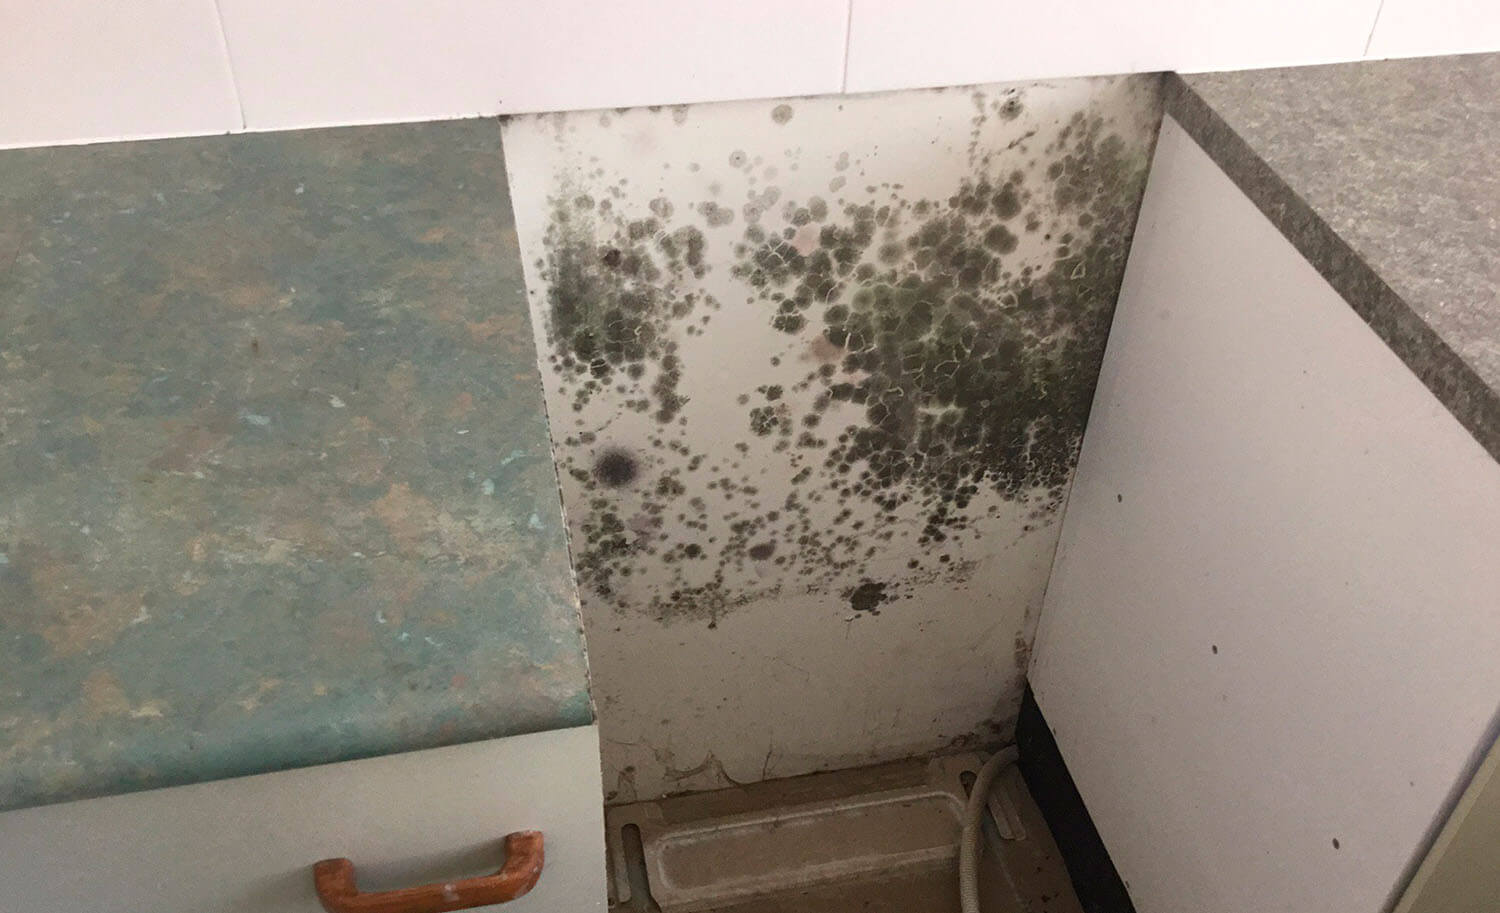 Mould and mould spores hiding behind kitchen appliances.